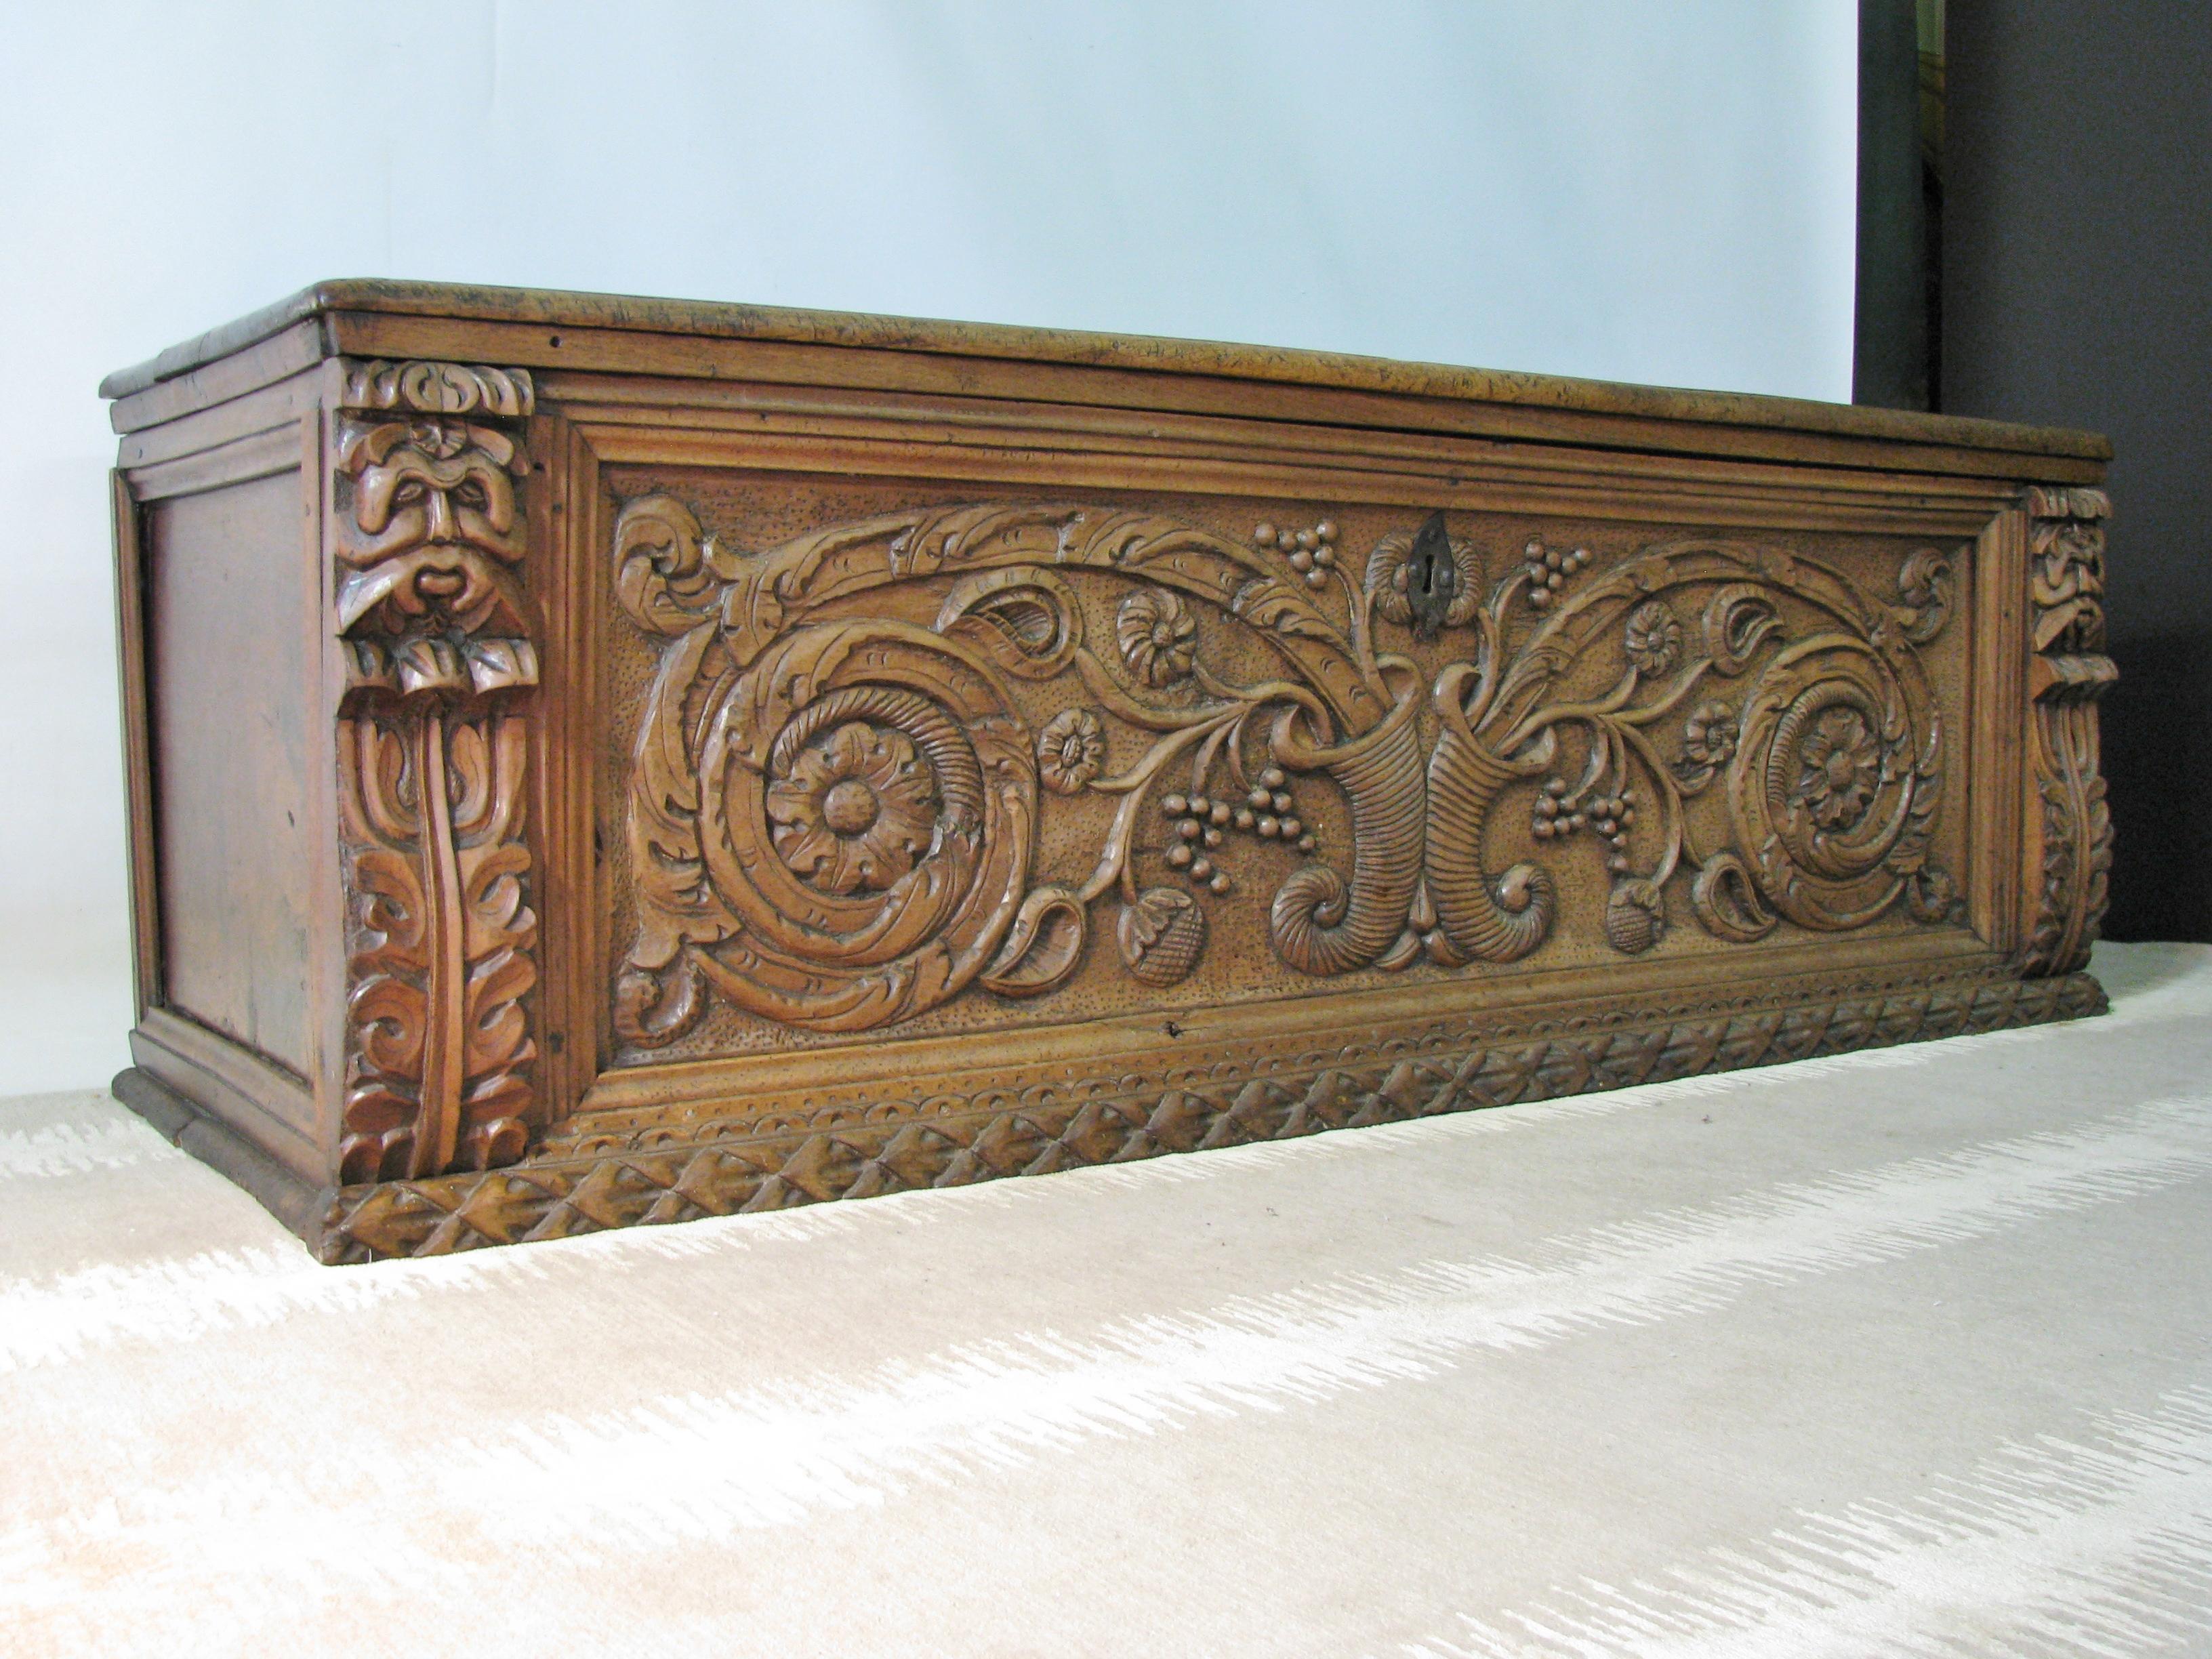 Renaissance Elaborately Carved 17th Century Italian Trunk or Cassone For Sale